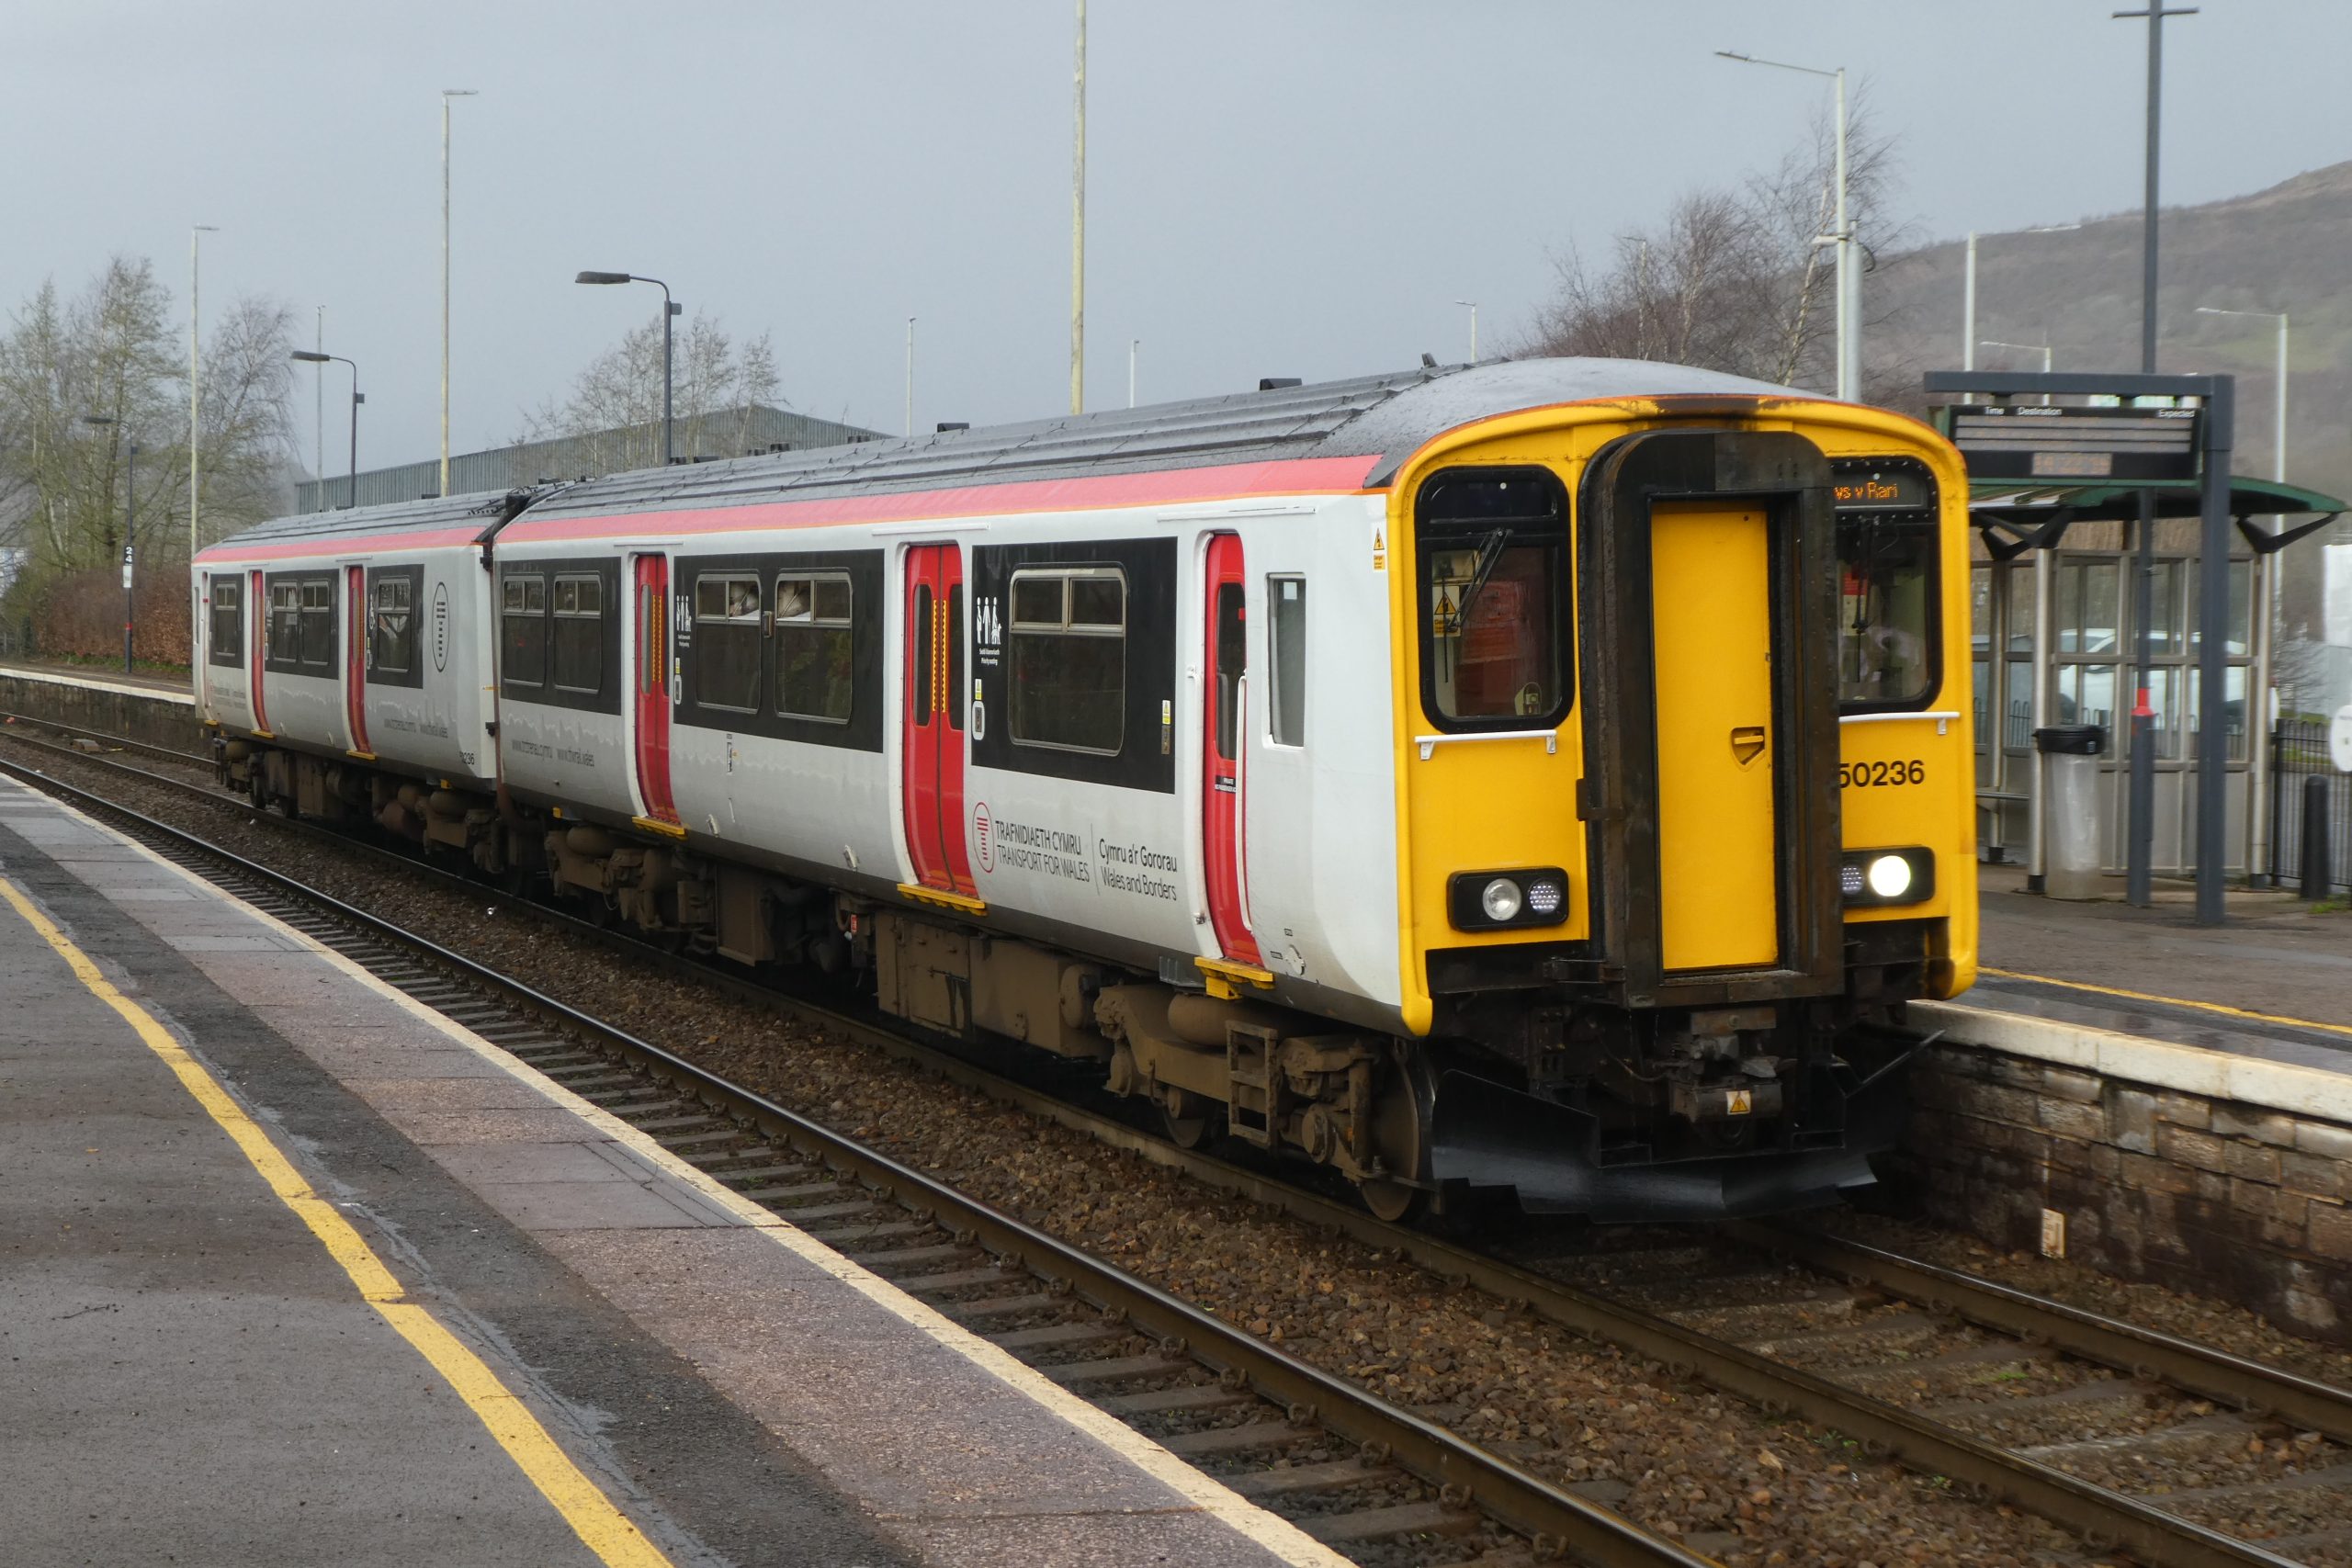 NEWS | Transport for Wales issues information ahead of strike action this coming week